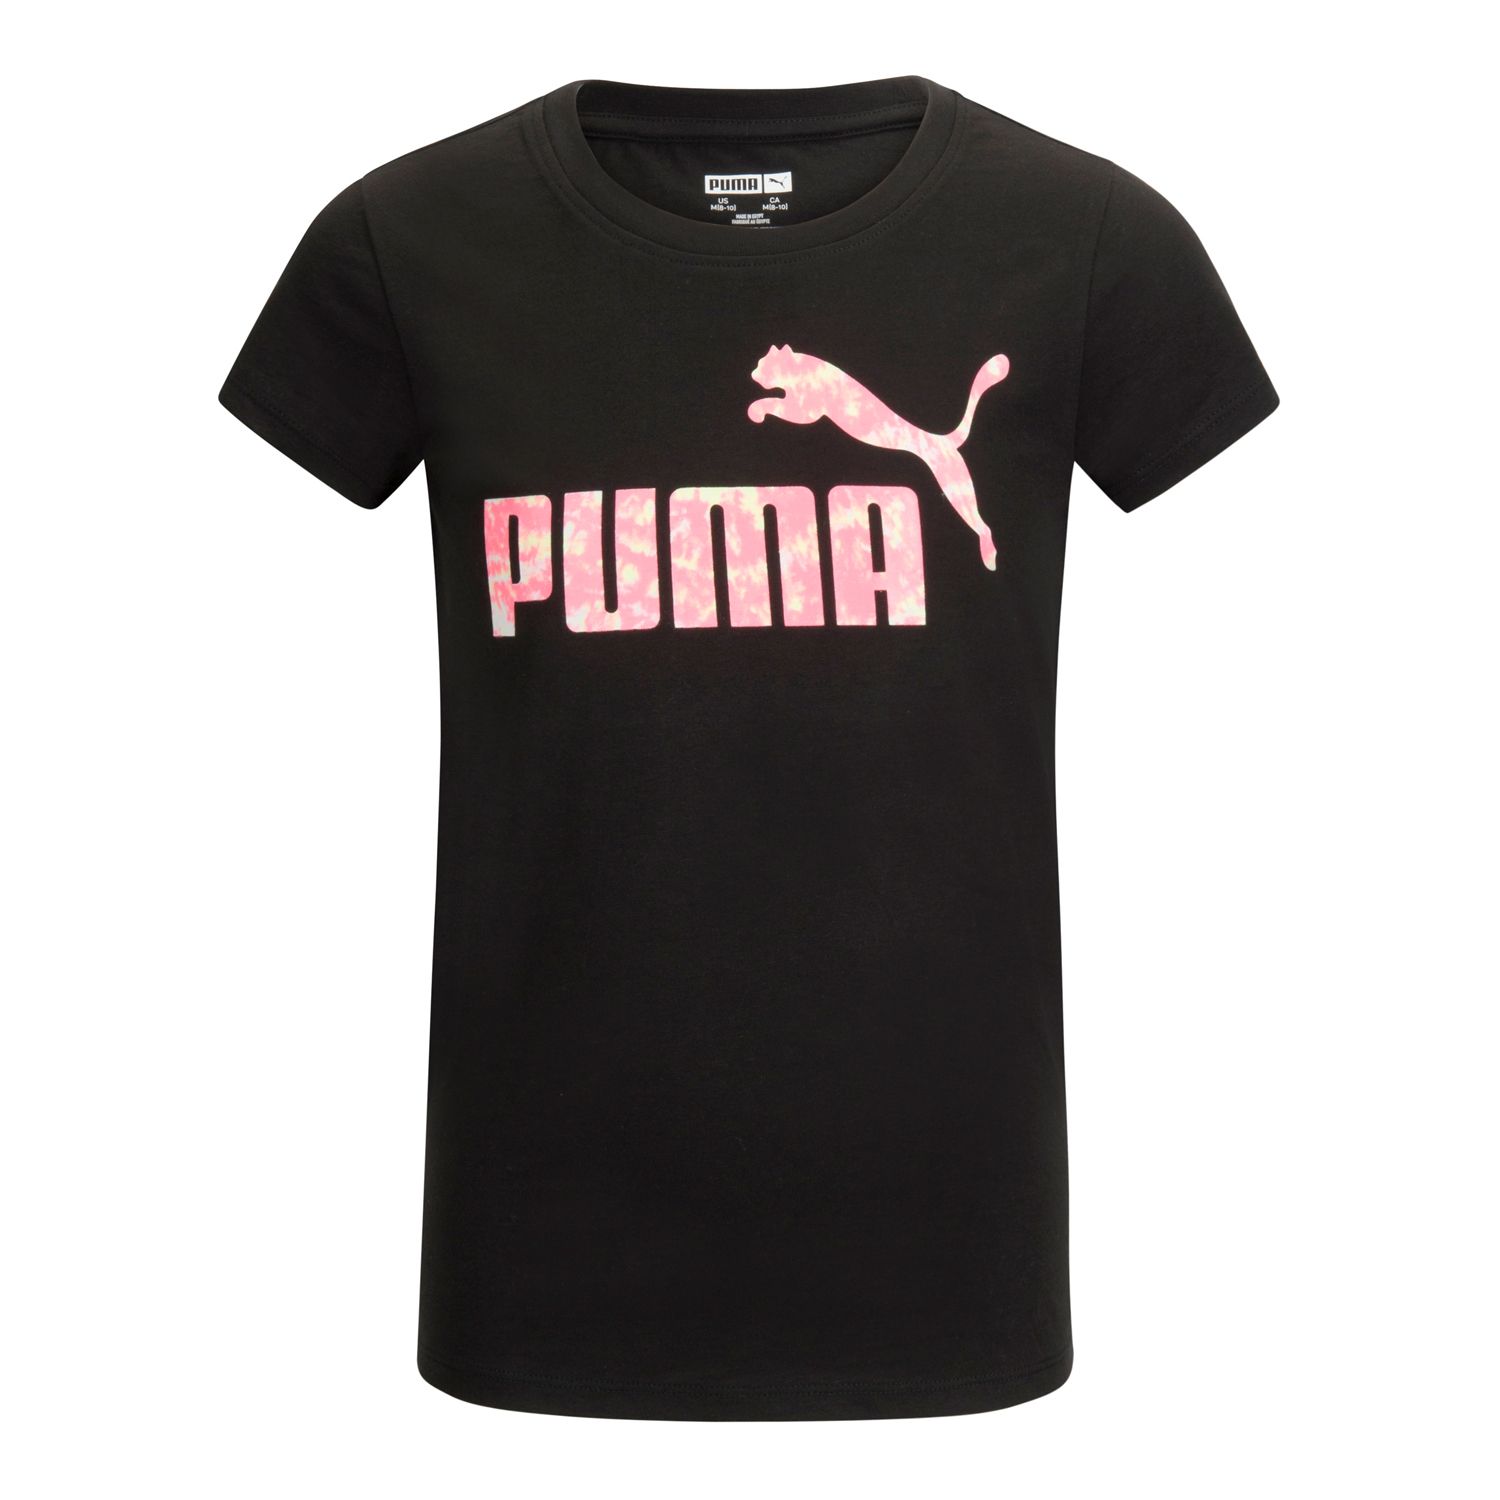 stores that sell puma clothing